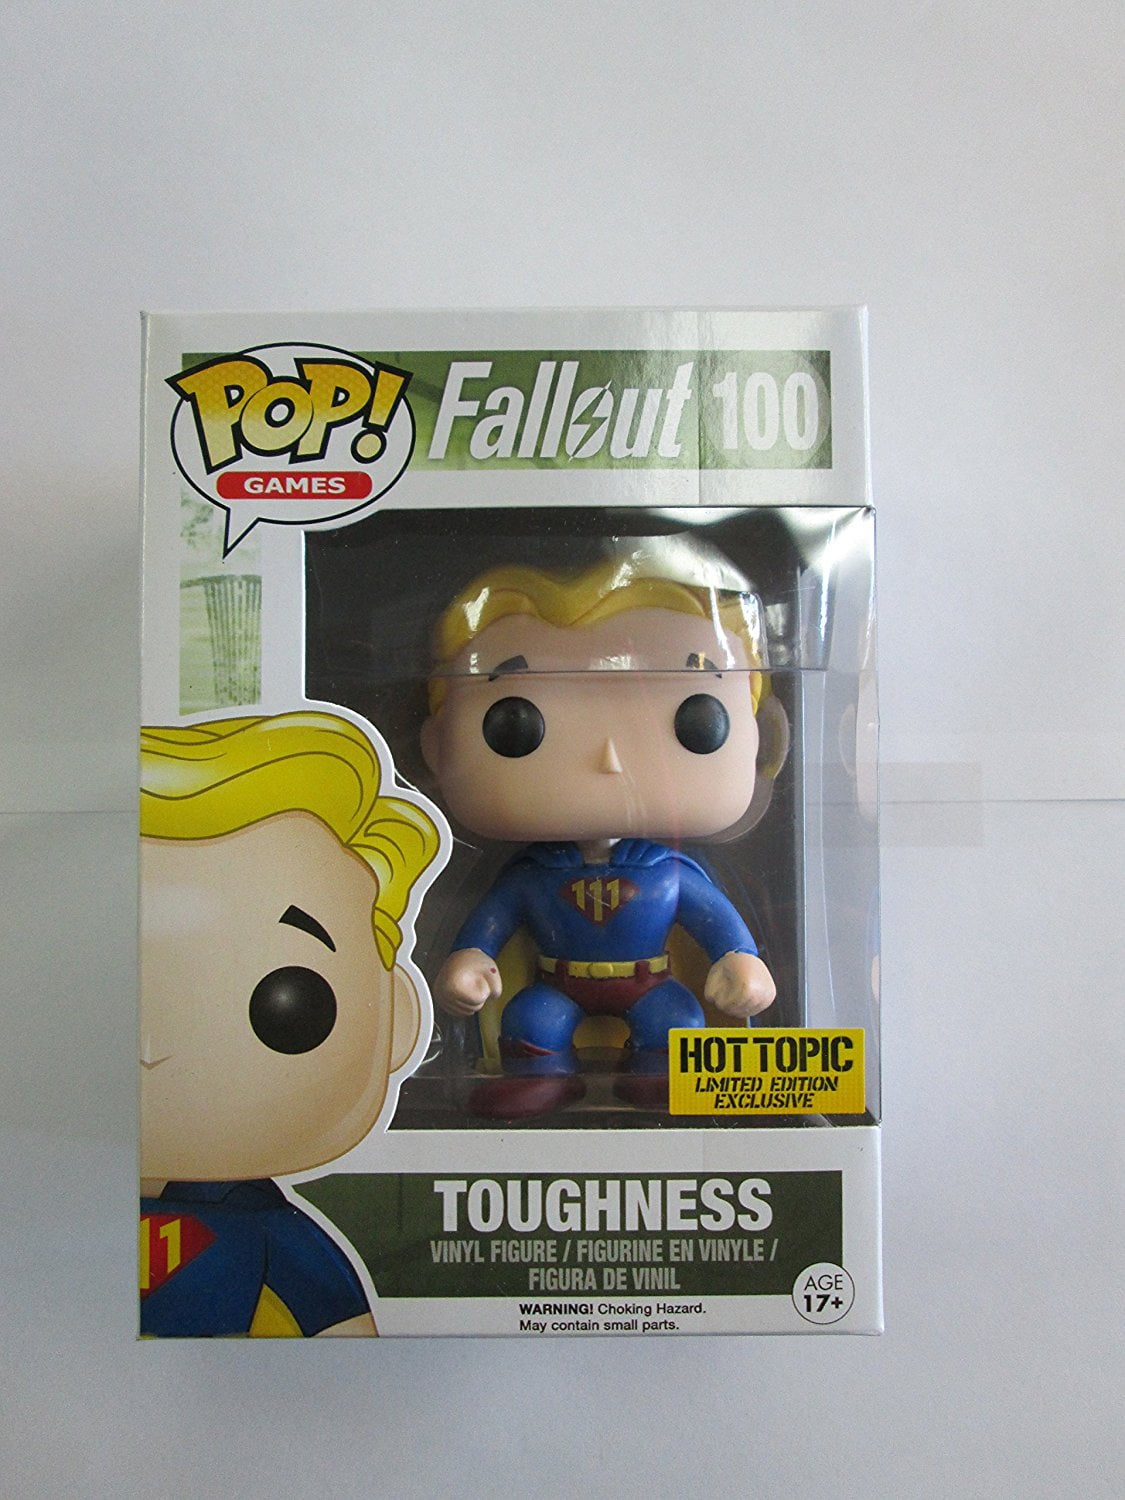 Funko Pop Games Fallout 4 Vault Boy Toughness 100 Hot Topic Le Medic for sale online 